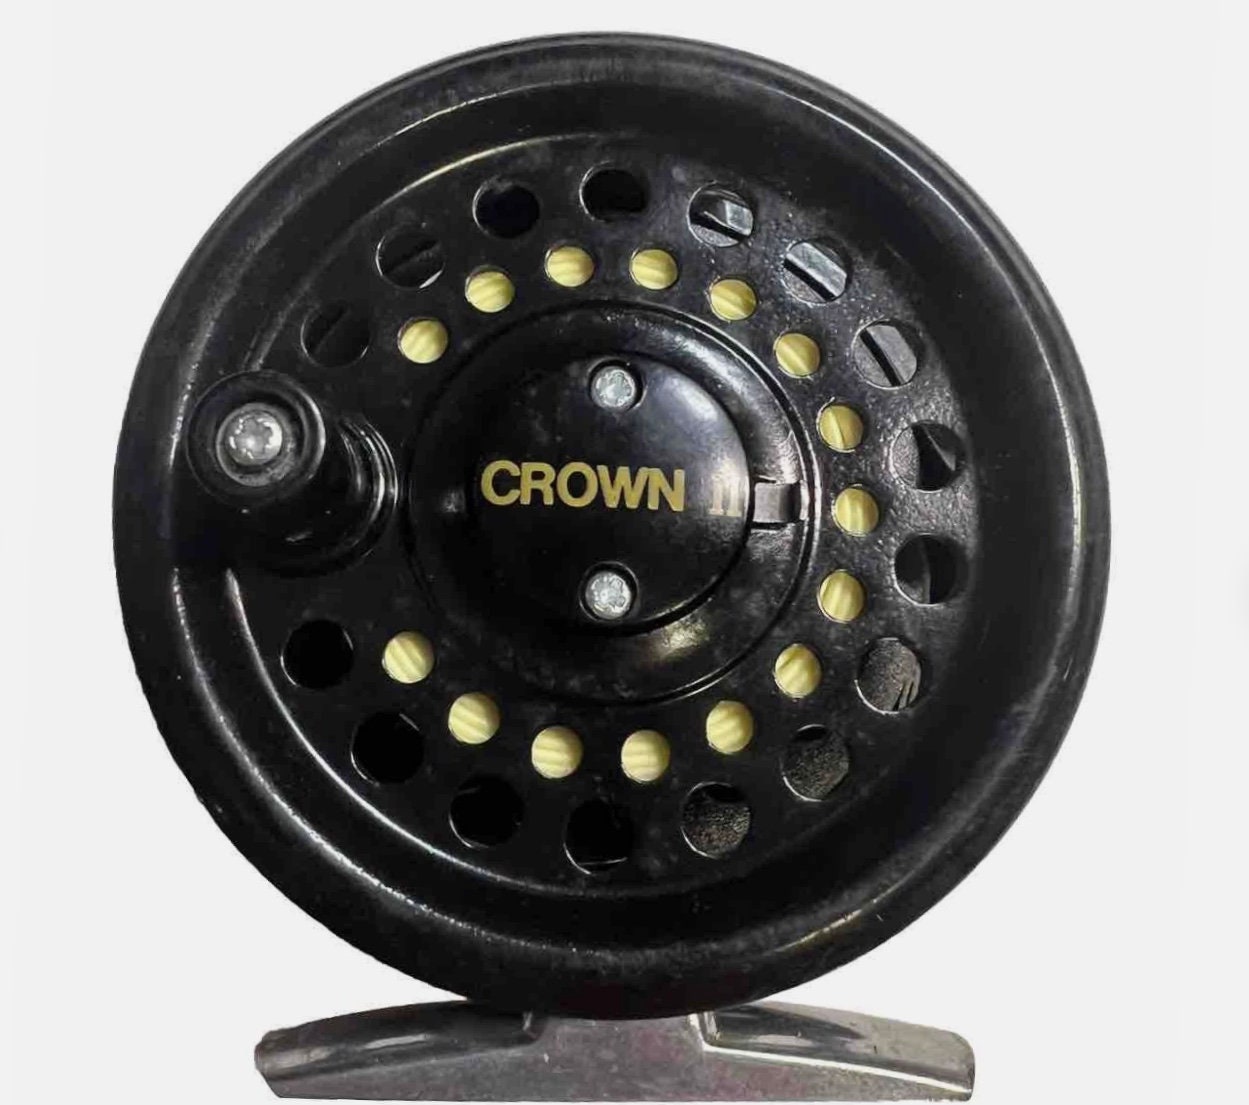 Pre-Owned Cortland Small (40 Yard) Crown ll Fly Reel with Line and Original  Box